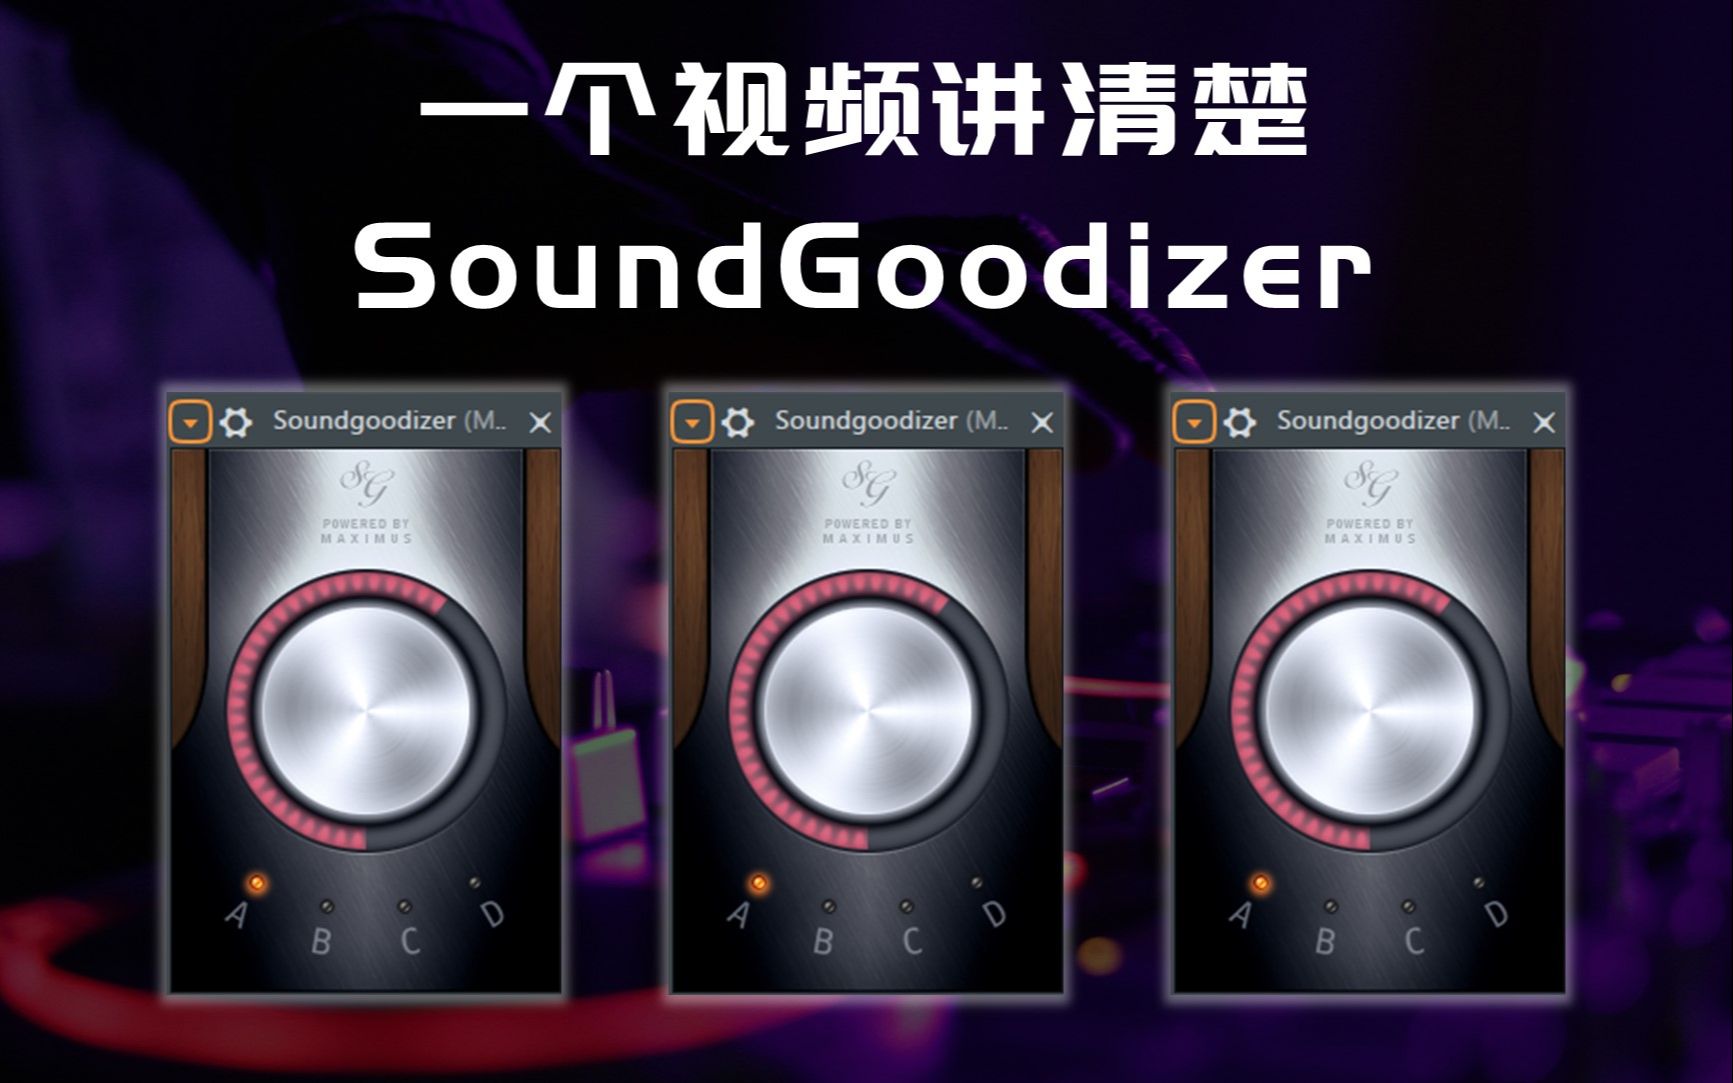 what does soundgoodizer do